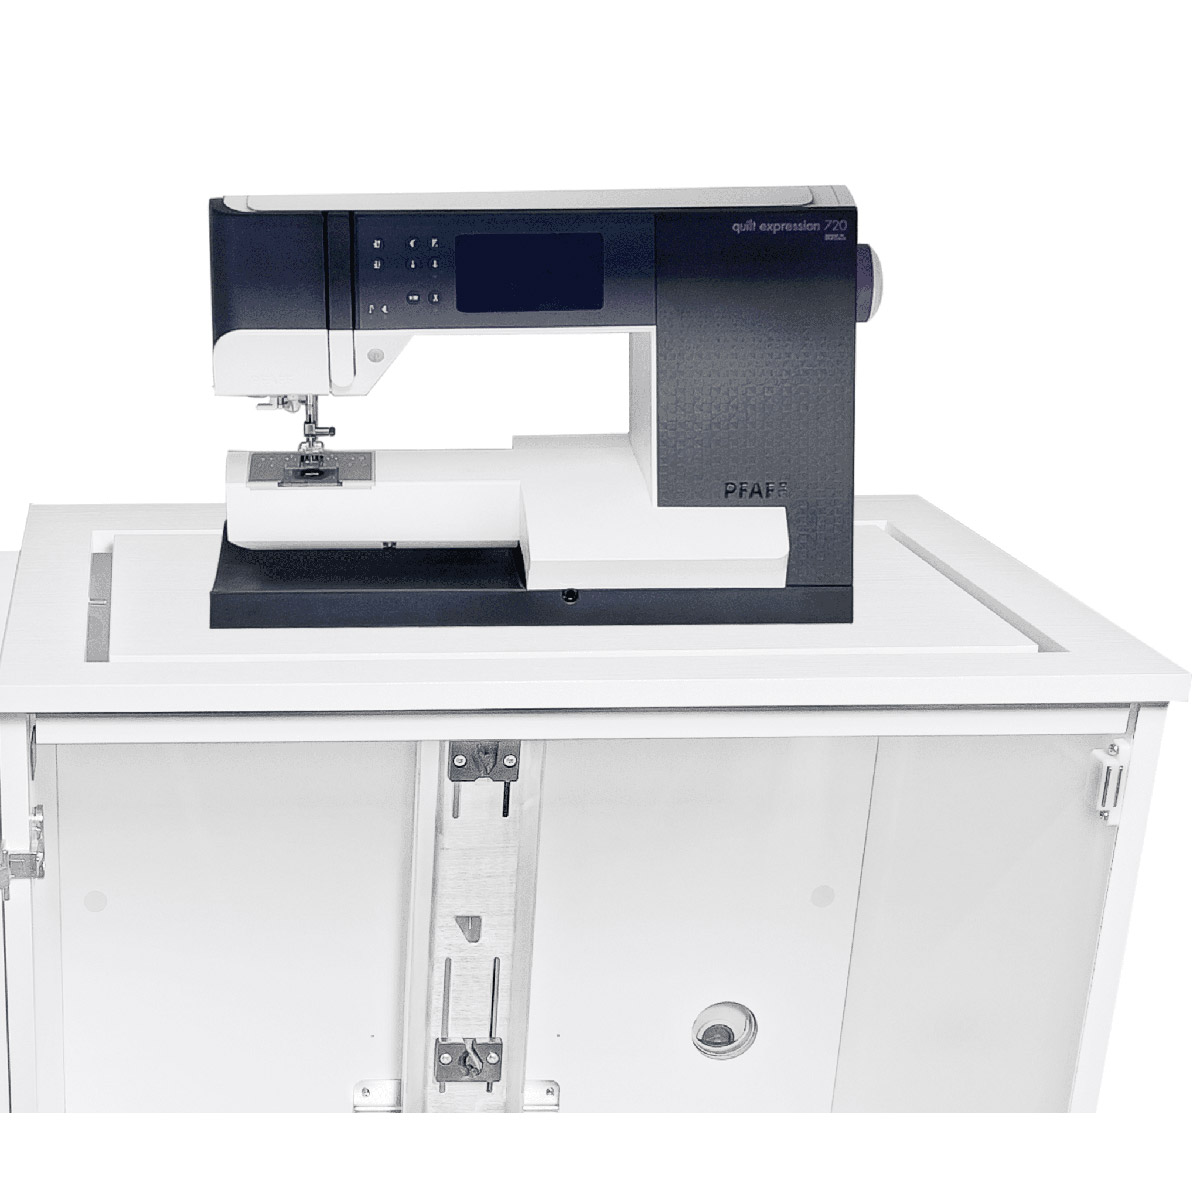 Free arm position of the Quilter's Petite cabinet lift brings machine to rest at the highest position